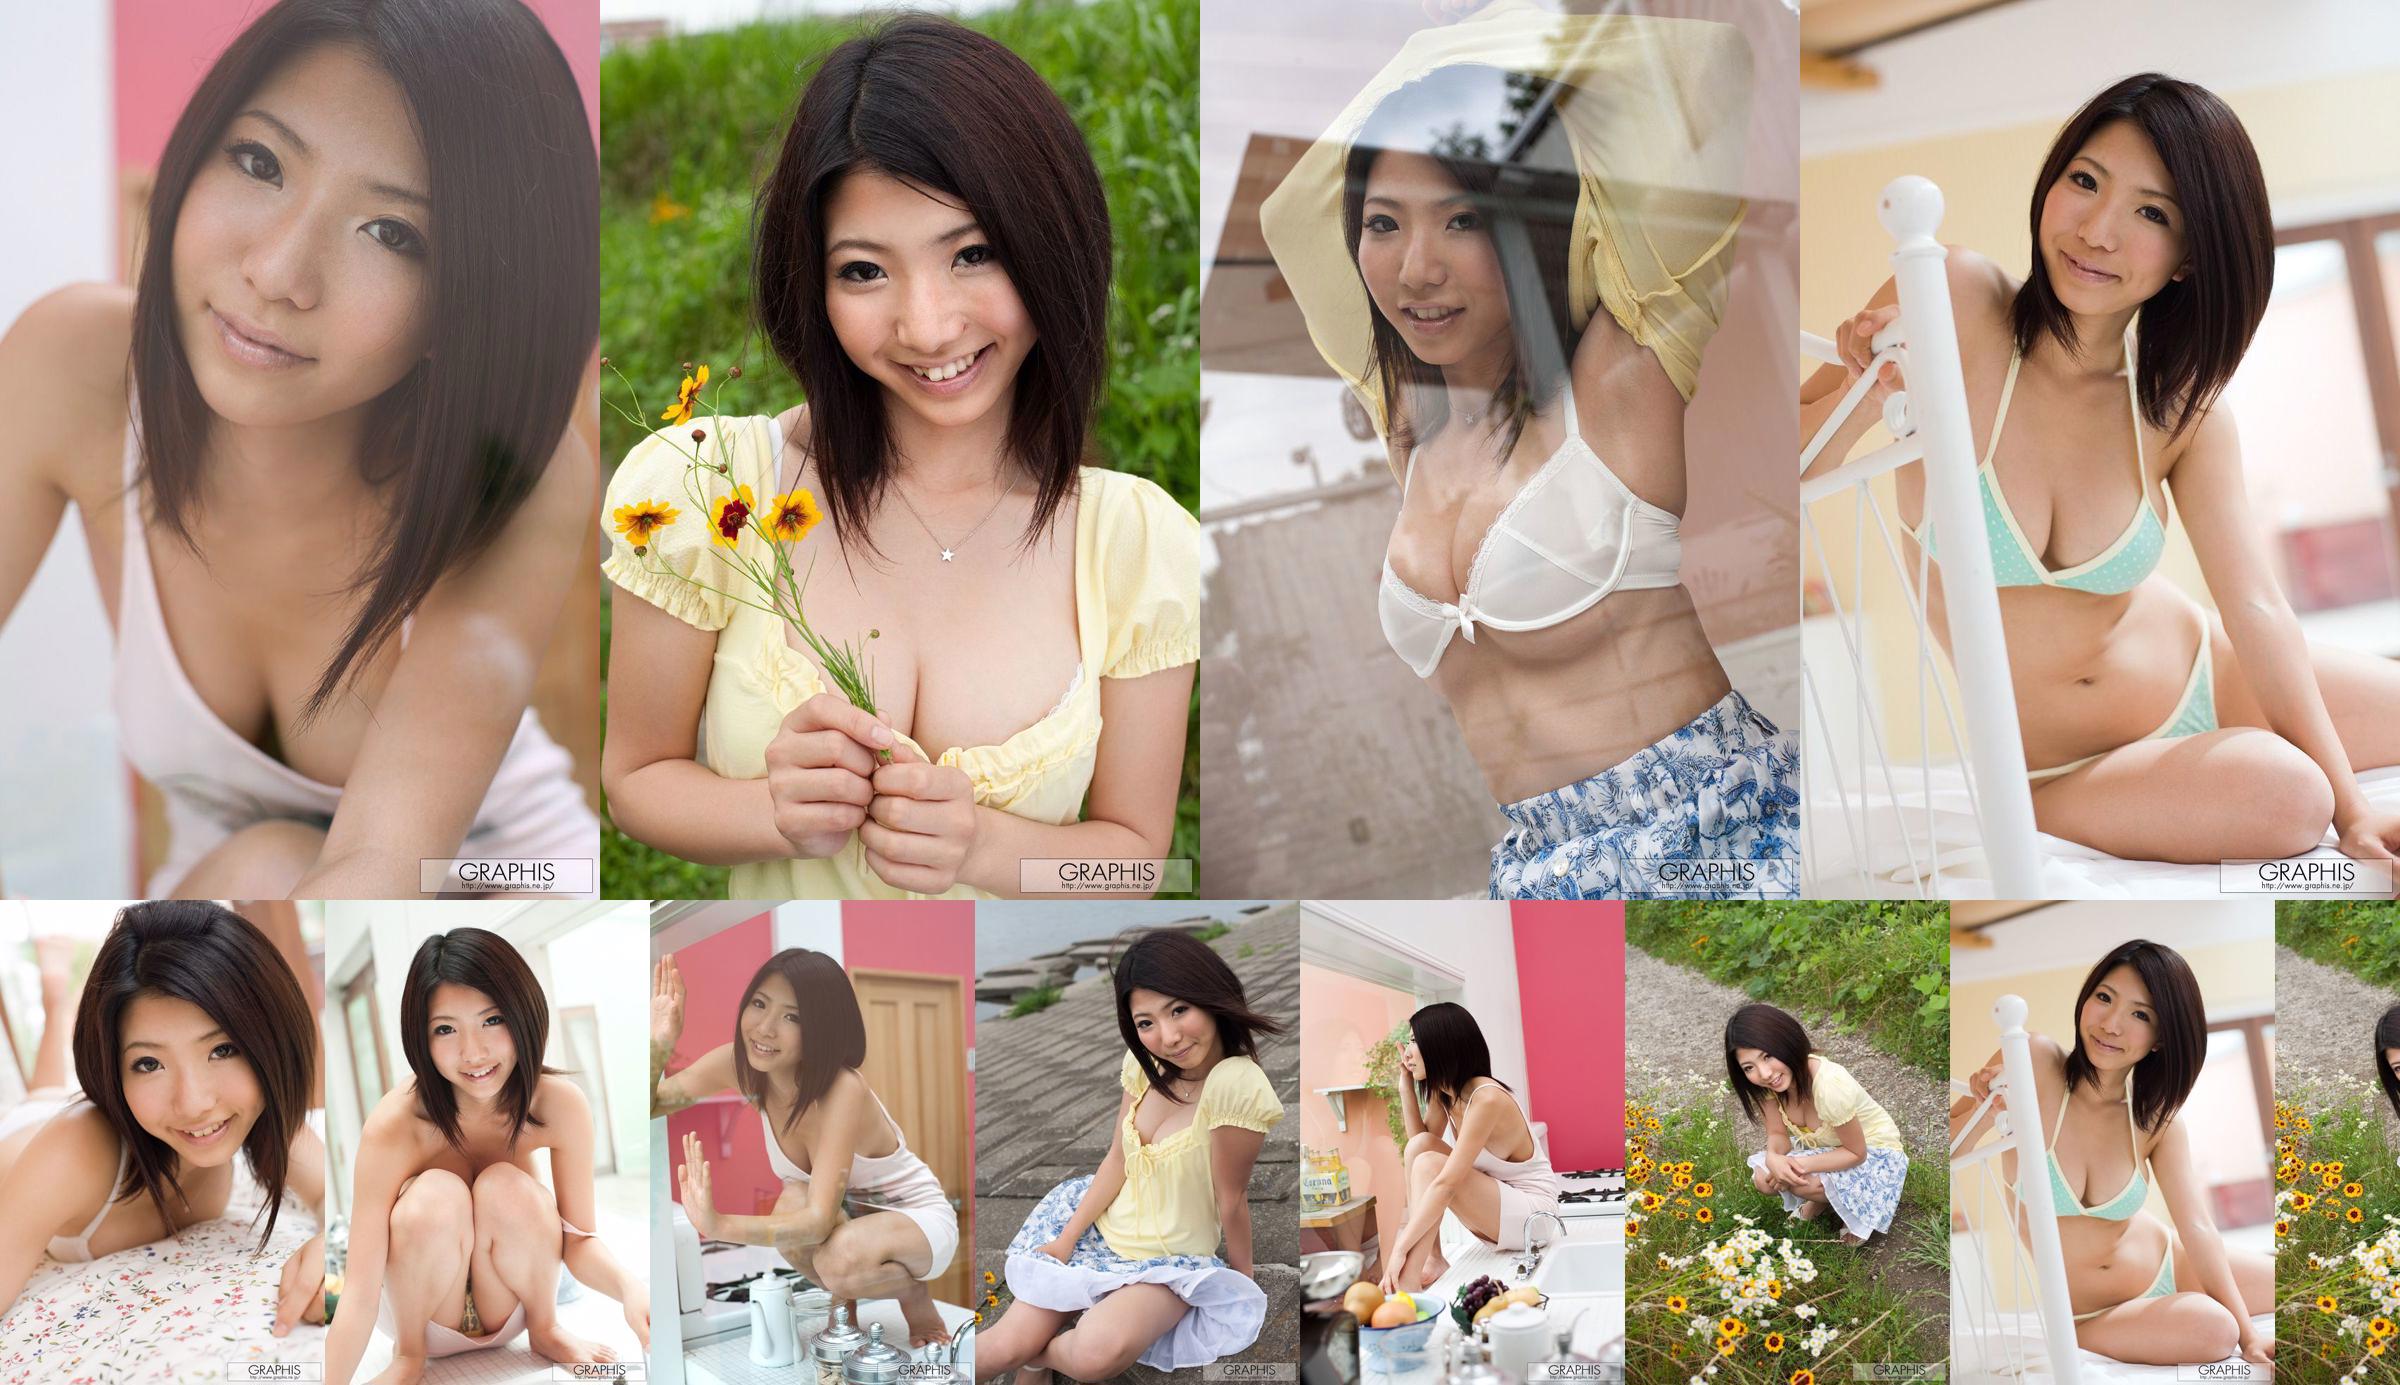 An Ann 《Simple and Innocent》 [Graphis] Gals No.21e83c Page 4